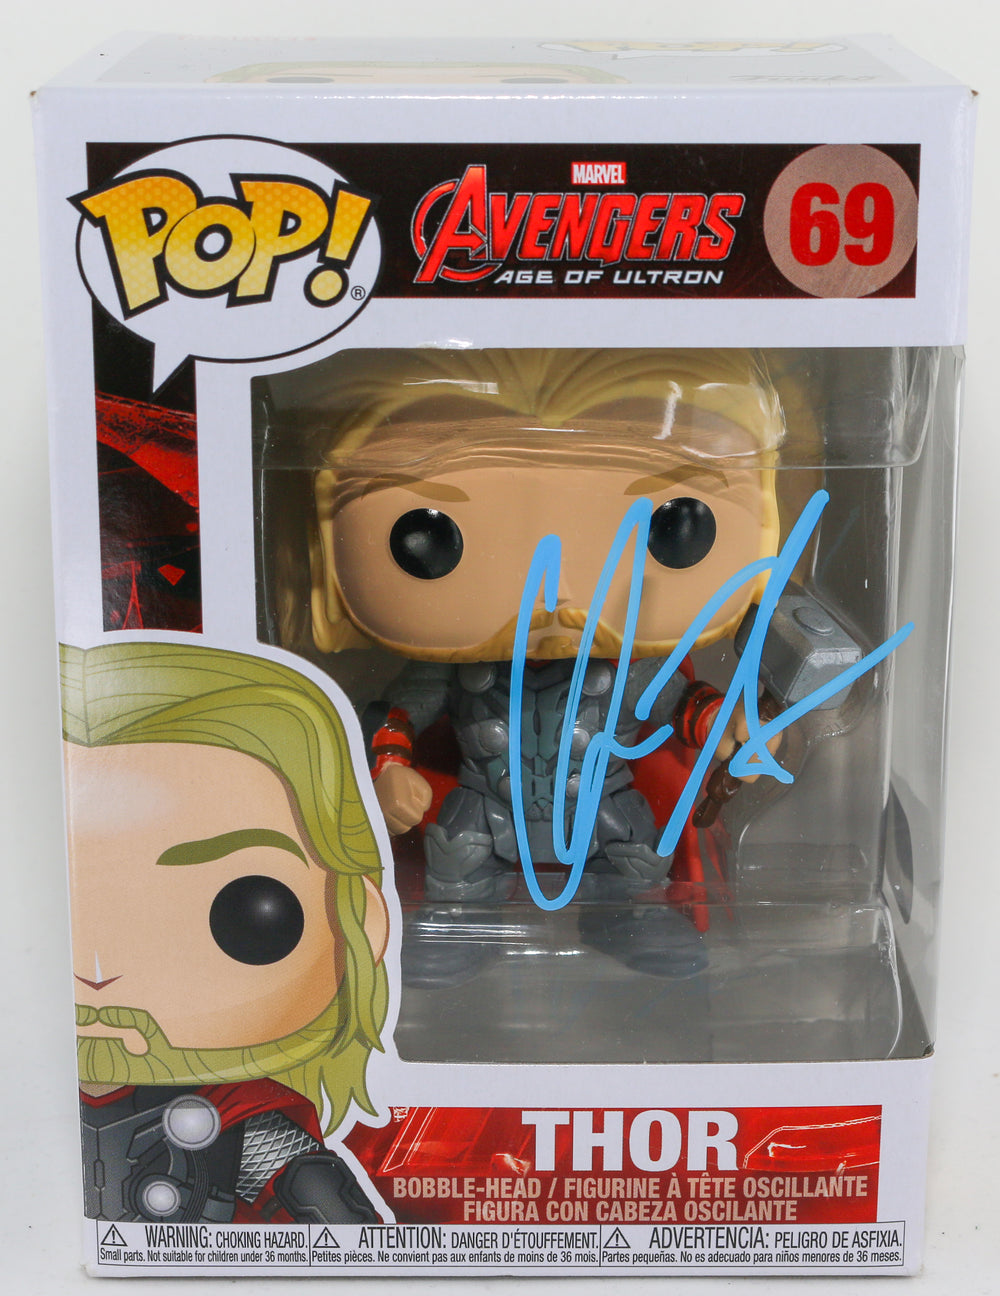 Chris Hemsworth as Thor in Avengers: Age of Ultron (SWAU) Signed POP! Funko #69